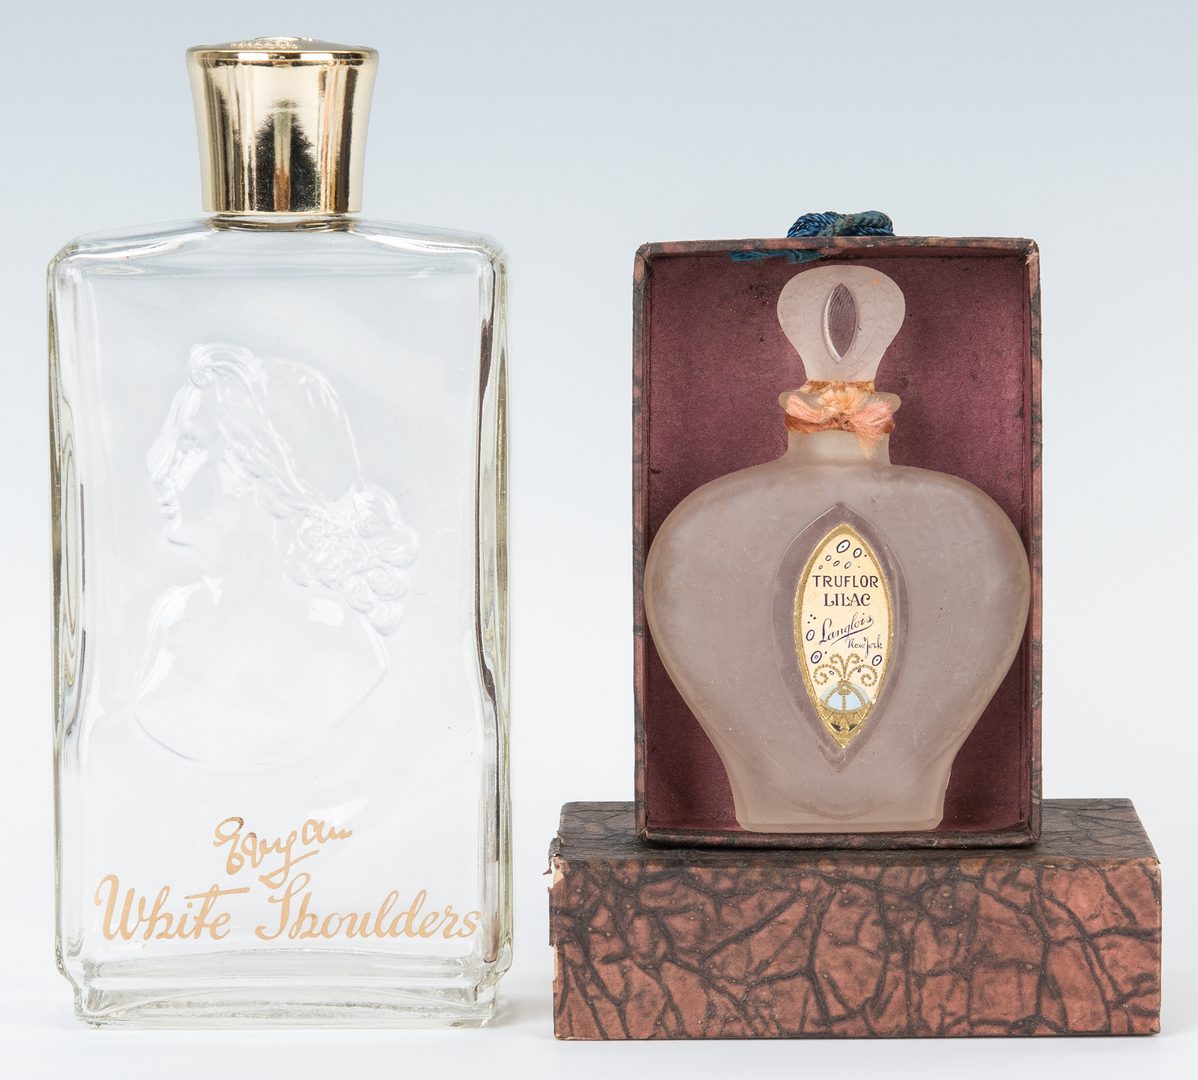 Lot 435: 28 Perfume Package Sets and Bottles